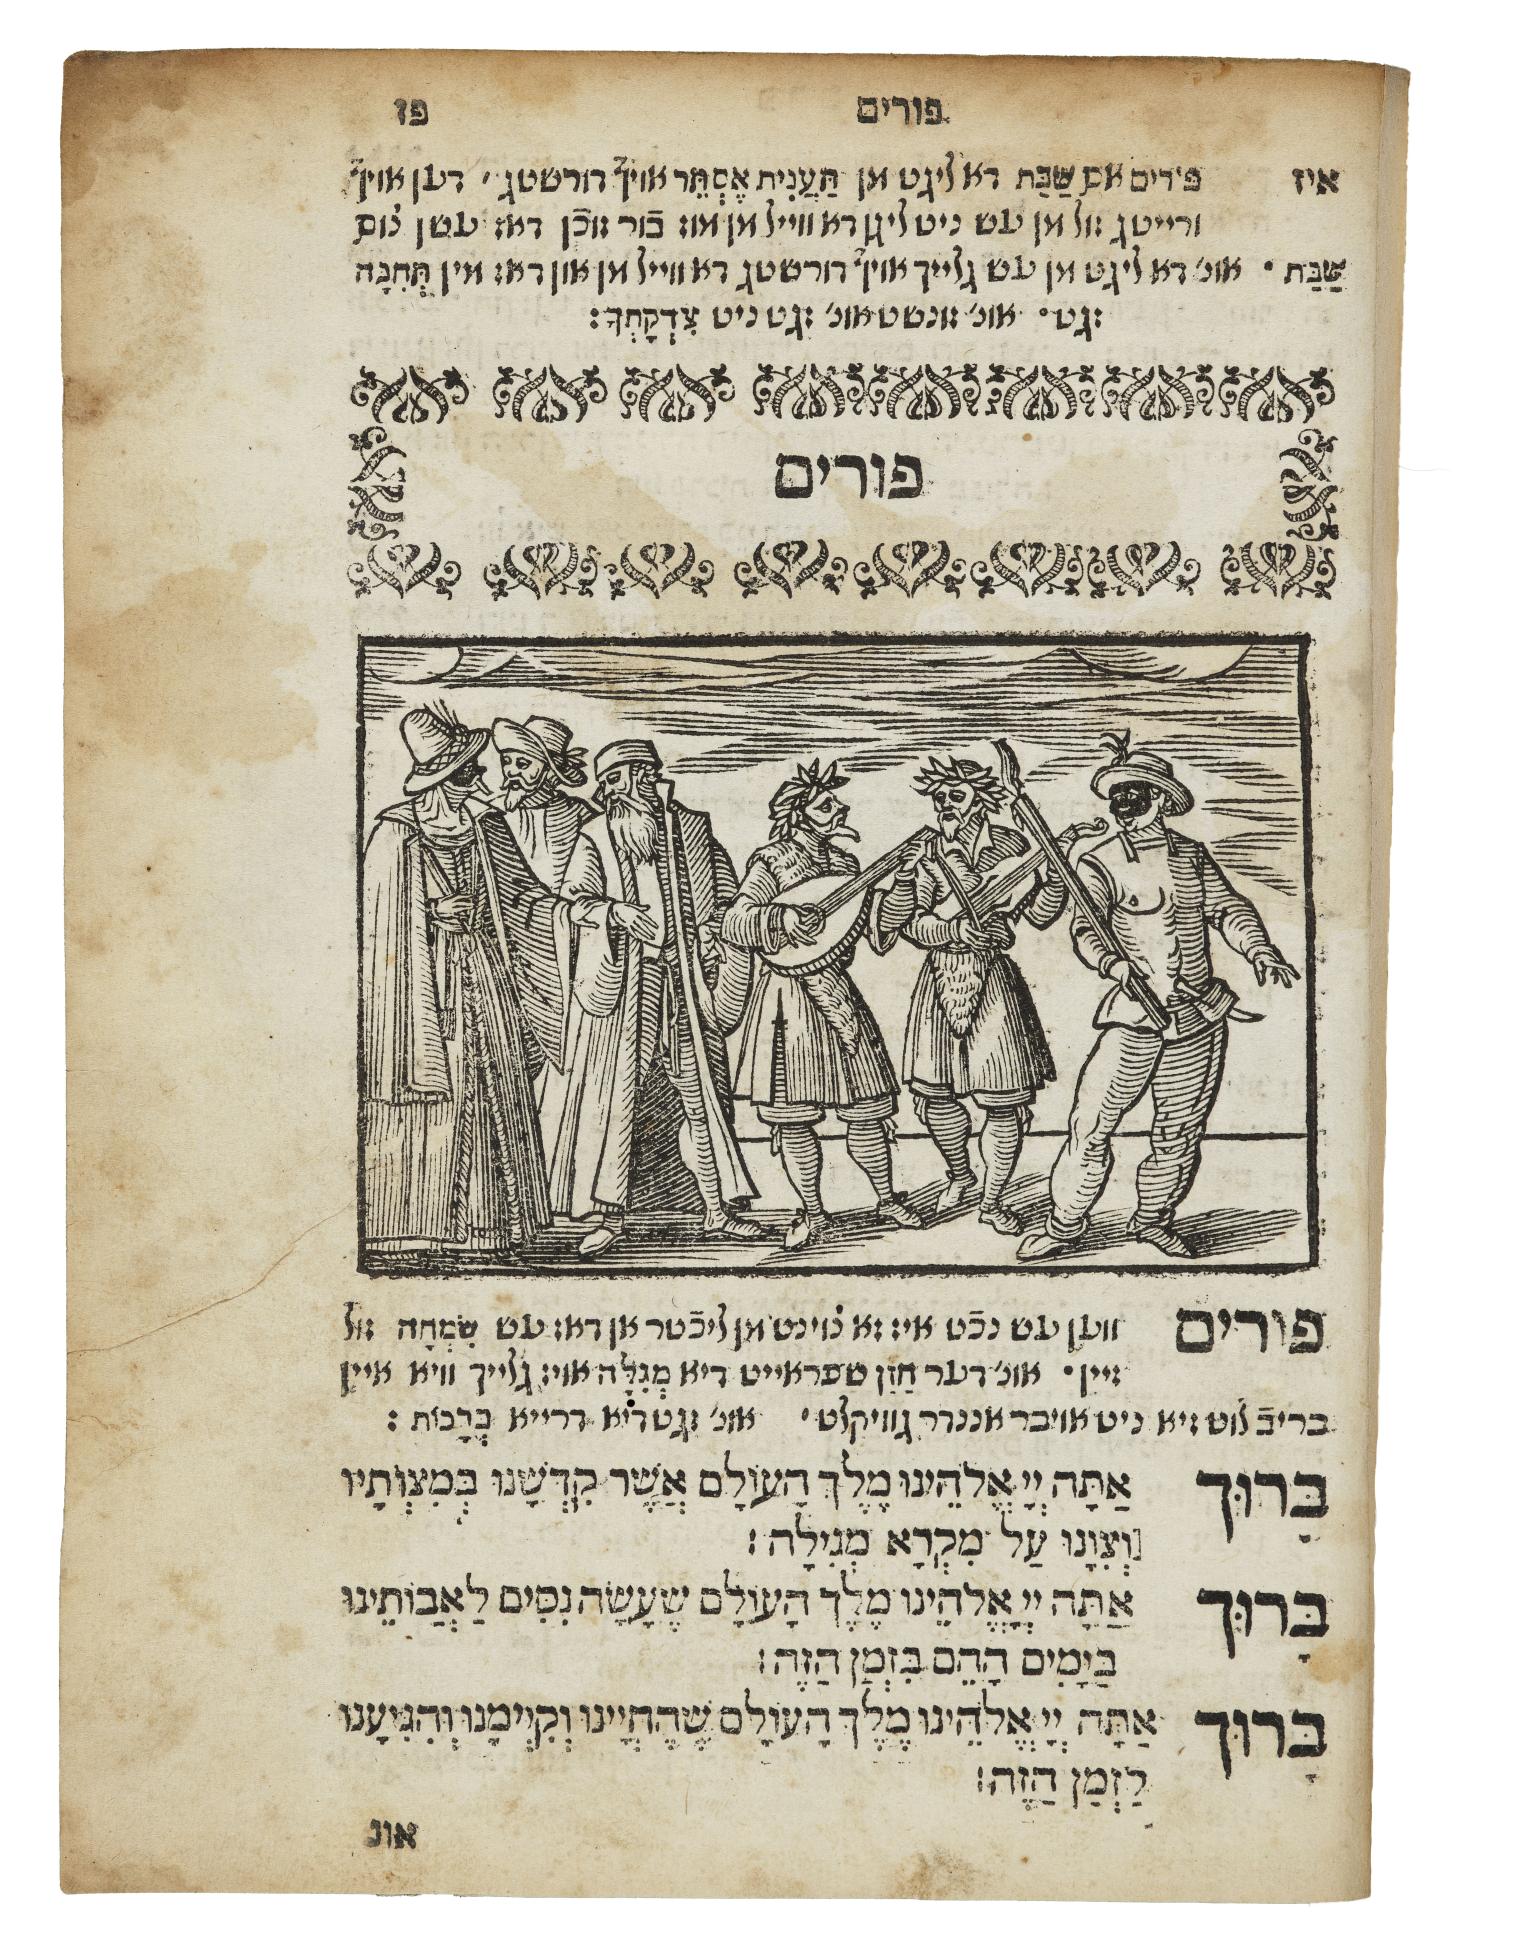 Woodcut illustration of six standing figures, three of whom are wearing masks and holding instruments, with Yiddish text above and below.